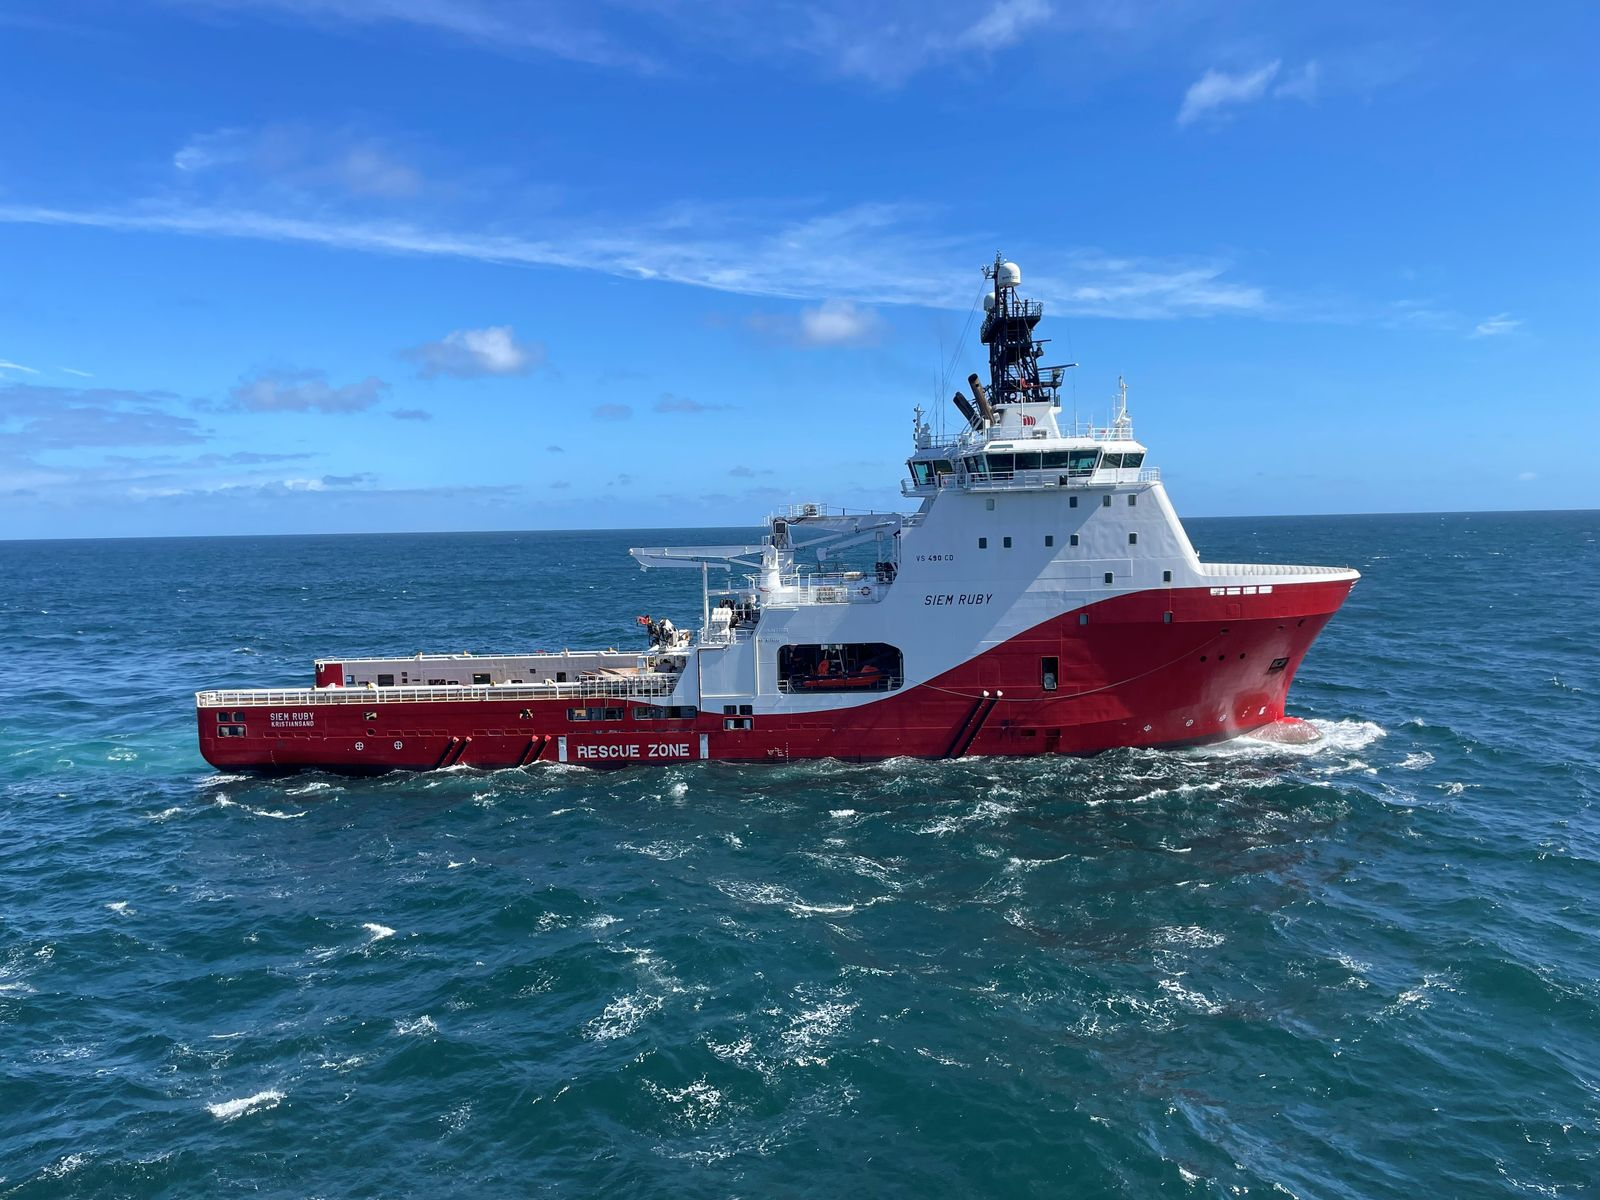 AHTS Siem Ruby; Source: Siem Offshore